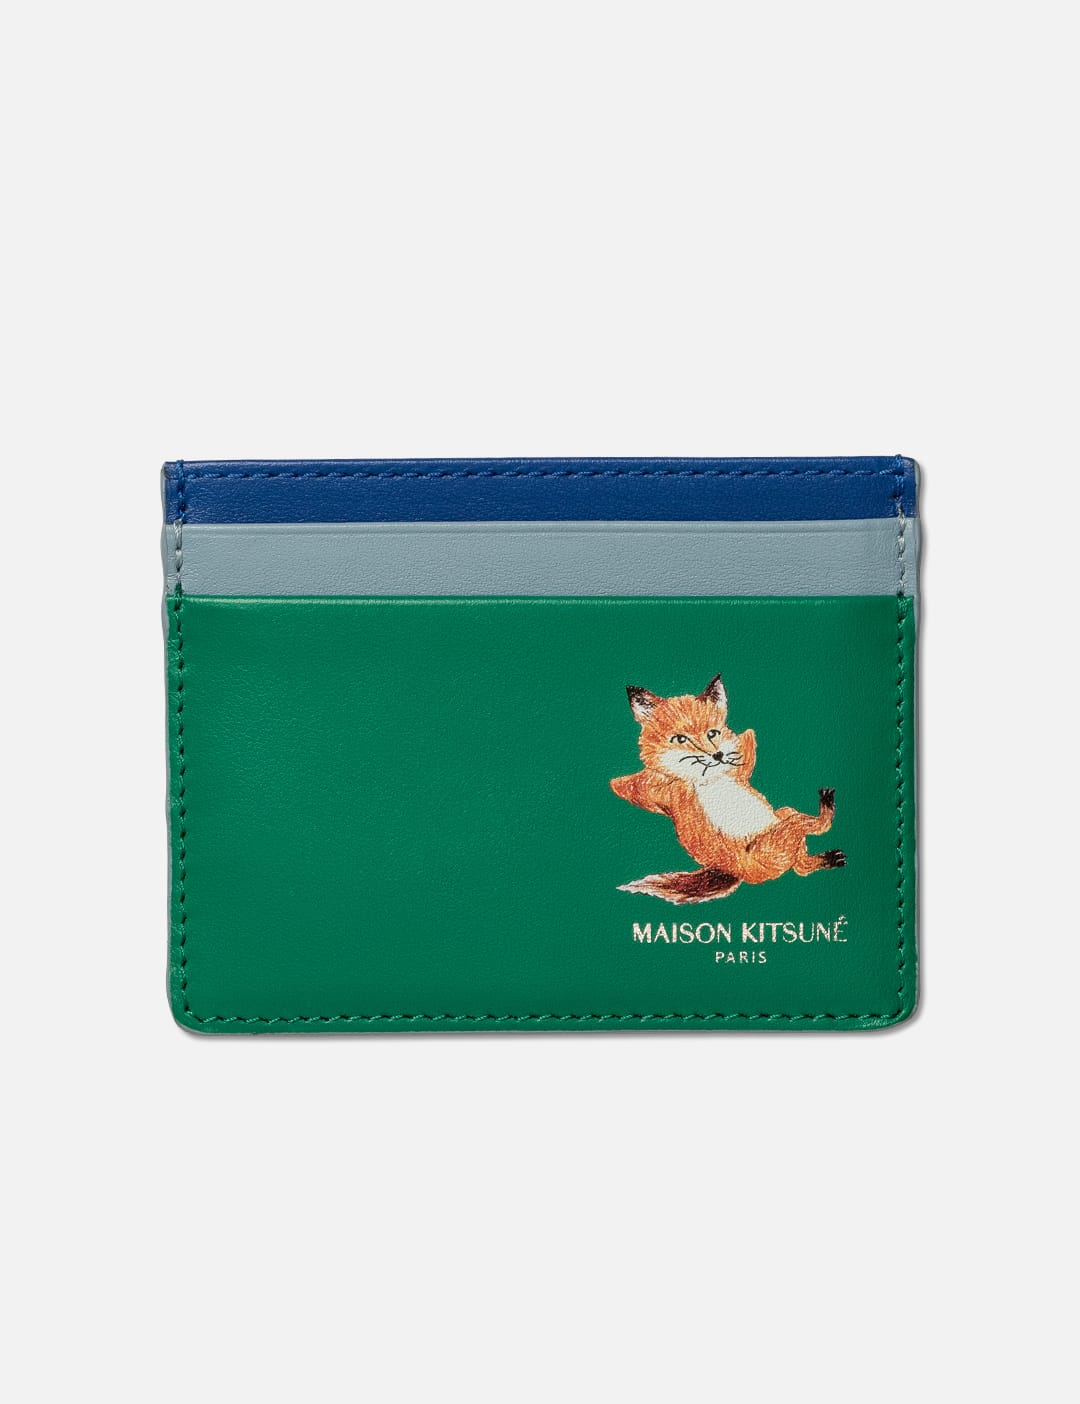 Maison Kitsuné - Chillax Card Holder | HBX - Globally Curated Fashion and  Lifestyle by Hypebeast